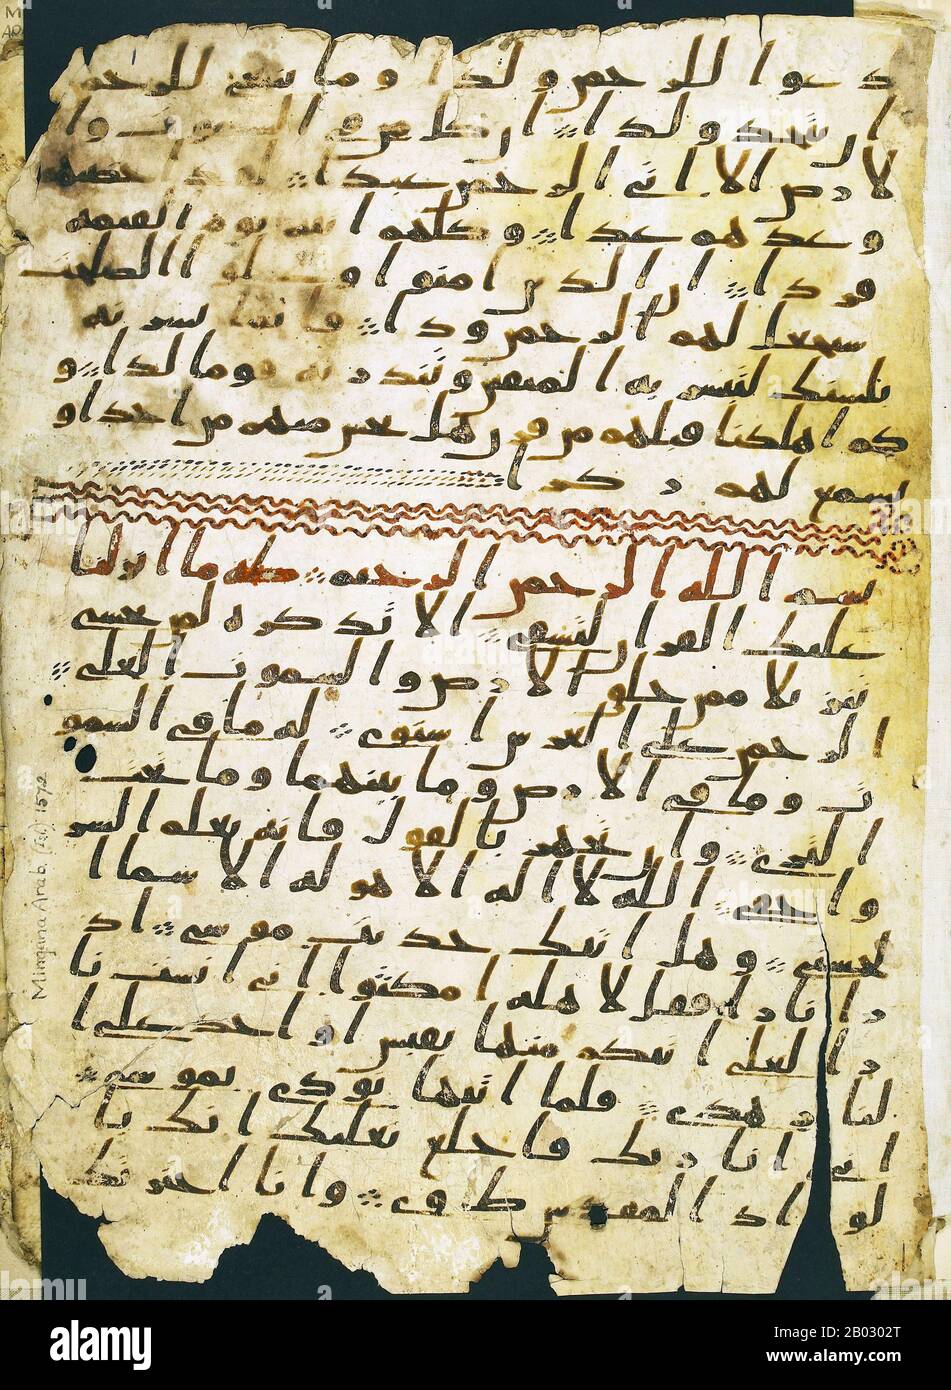 Two leaves of an early Quranic manuscript in the Mingana Collection of Middle Eastern manuscripts of the University of Birmingham's Cadbury Research Library were identified in 2015 as being dated between 568 and 645, making this the oldest Quran manuscripts to date.  The manuscript is written in ink on parchment, using a monumental Arabic Hijazi script and is still clearly legible. The leaves preserve parts of Surahs 18 to 20.  The university intends to place the manuscript on display for the first time at the Barber Institute of Fine Arts during October 2015, and then at the Birmingham Museum Stock Photo